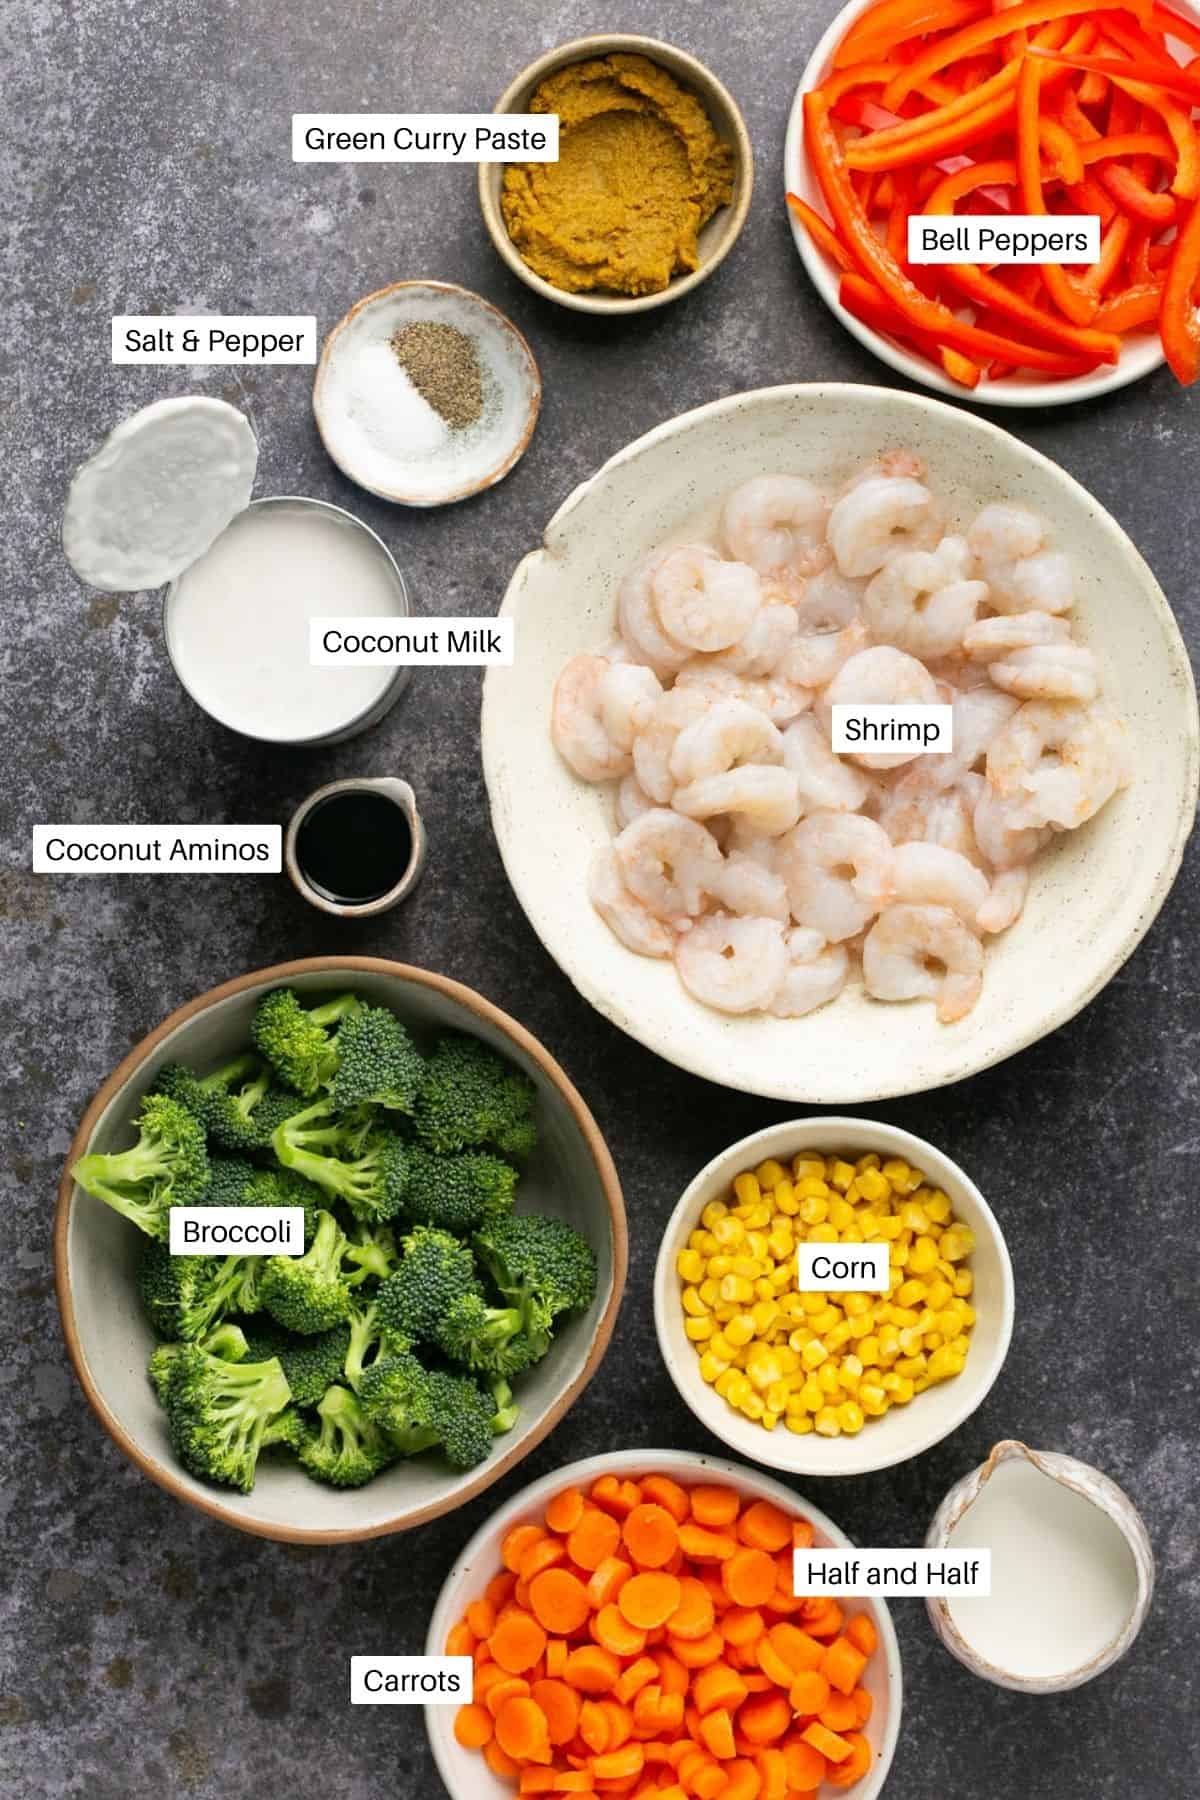 Ingredients for the dish laid out. 